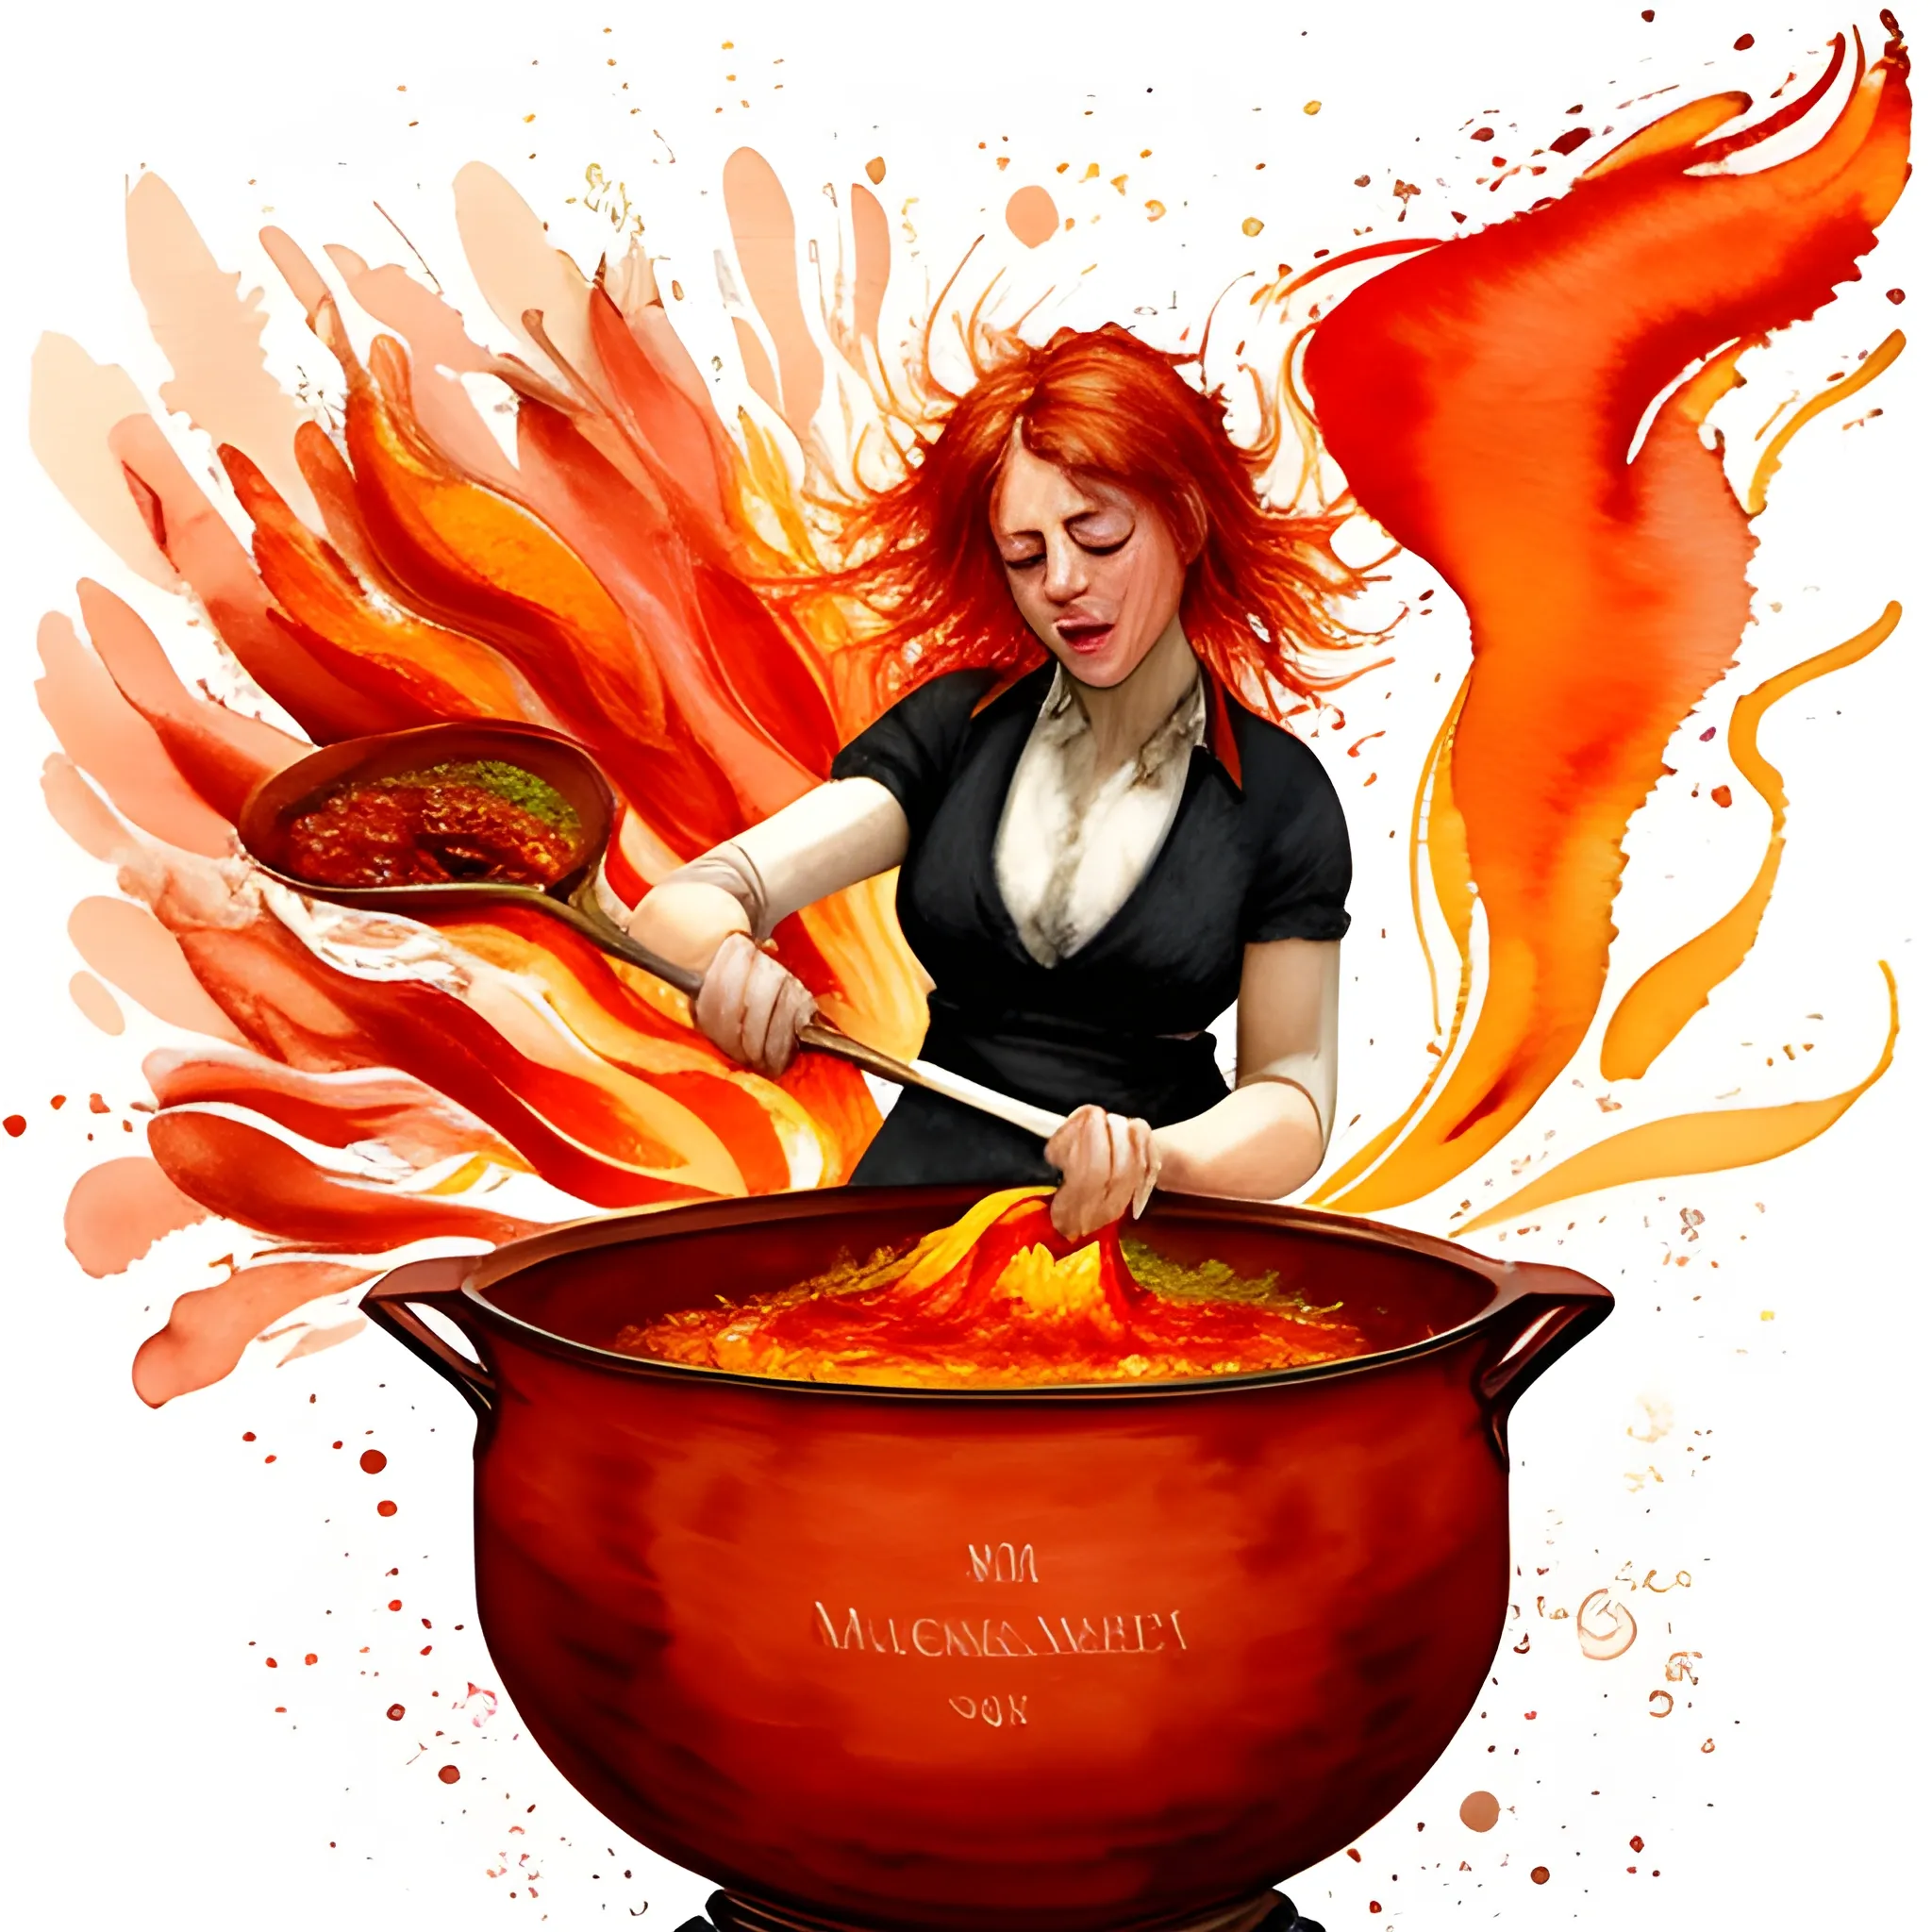 Illustrate a woman passionately preparing a fiery, spicey dish in a colossal cauldron, inspired by the watercolor techniques of the famous painter J.M.W. Turner. The reds and oranges should burst with vibrancy, capturing the intensity of the flavors she's creating